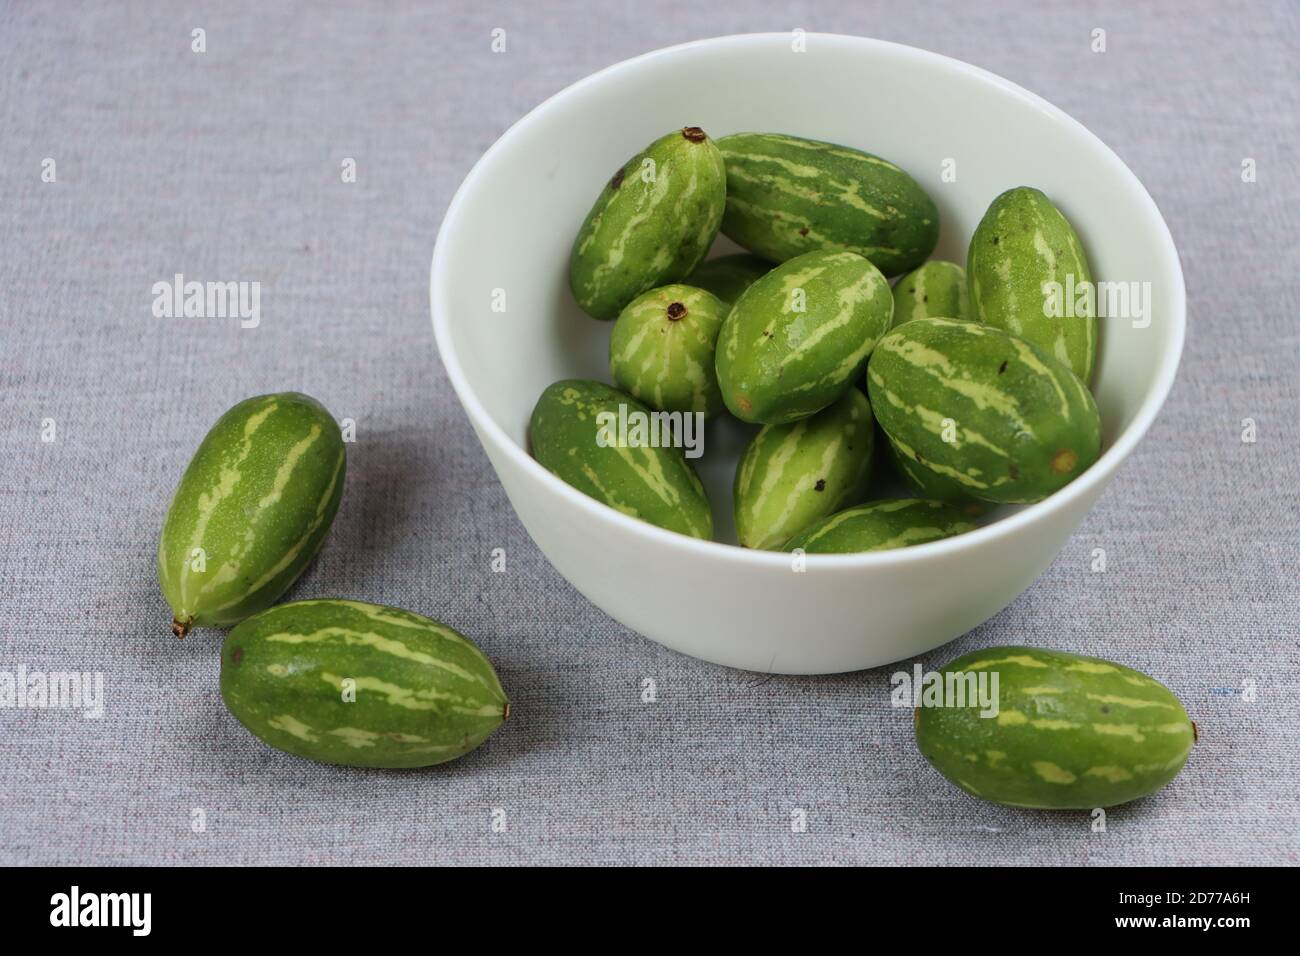 Ivy gourd or little gourds in white bowl Stock Photo